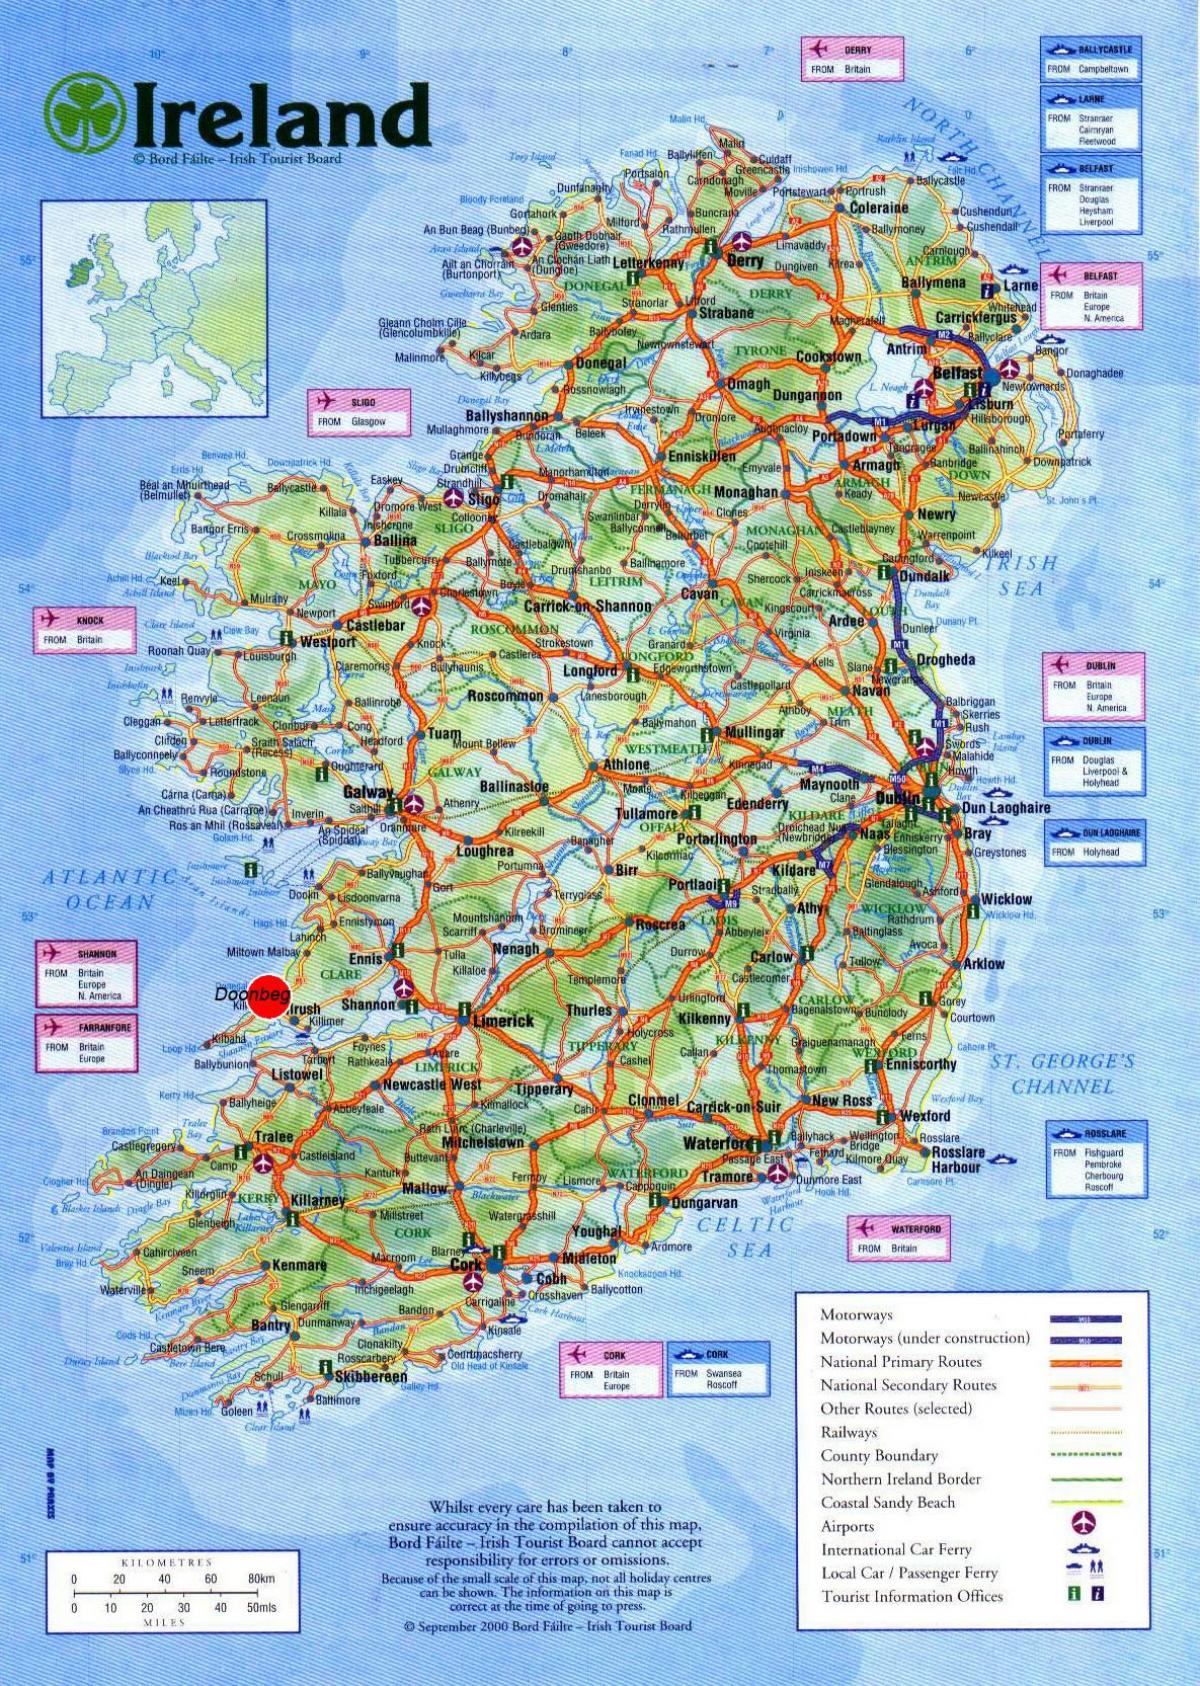 ireland-tourist-attractions-map-map-of-ireland-showing-tourist